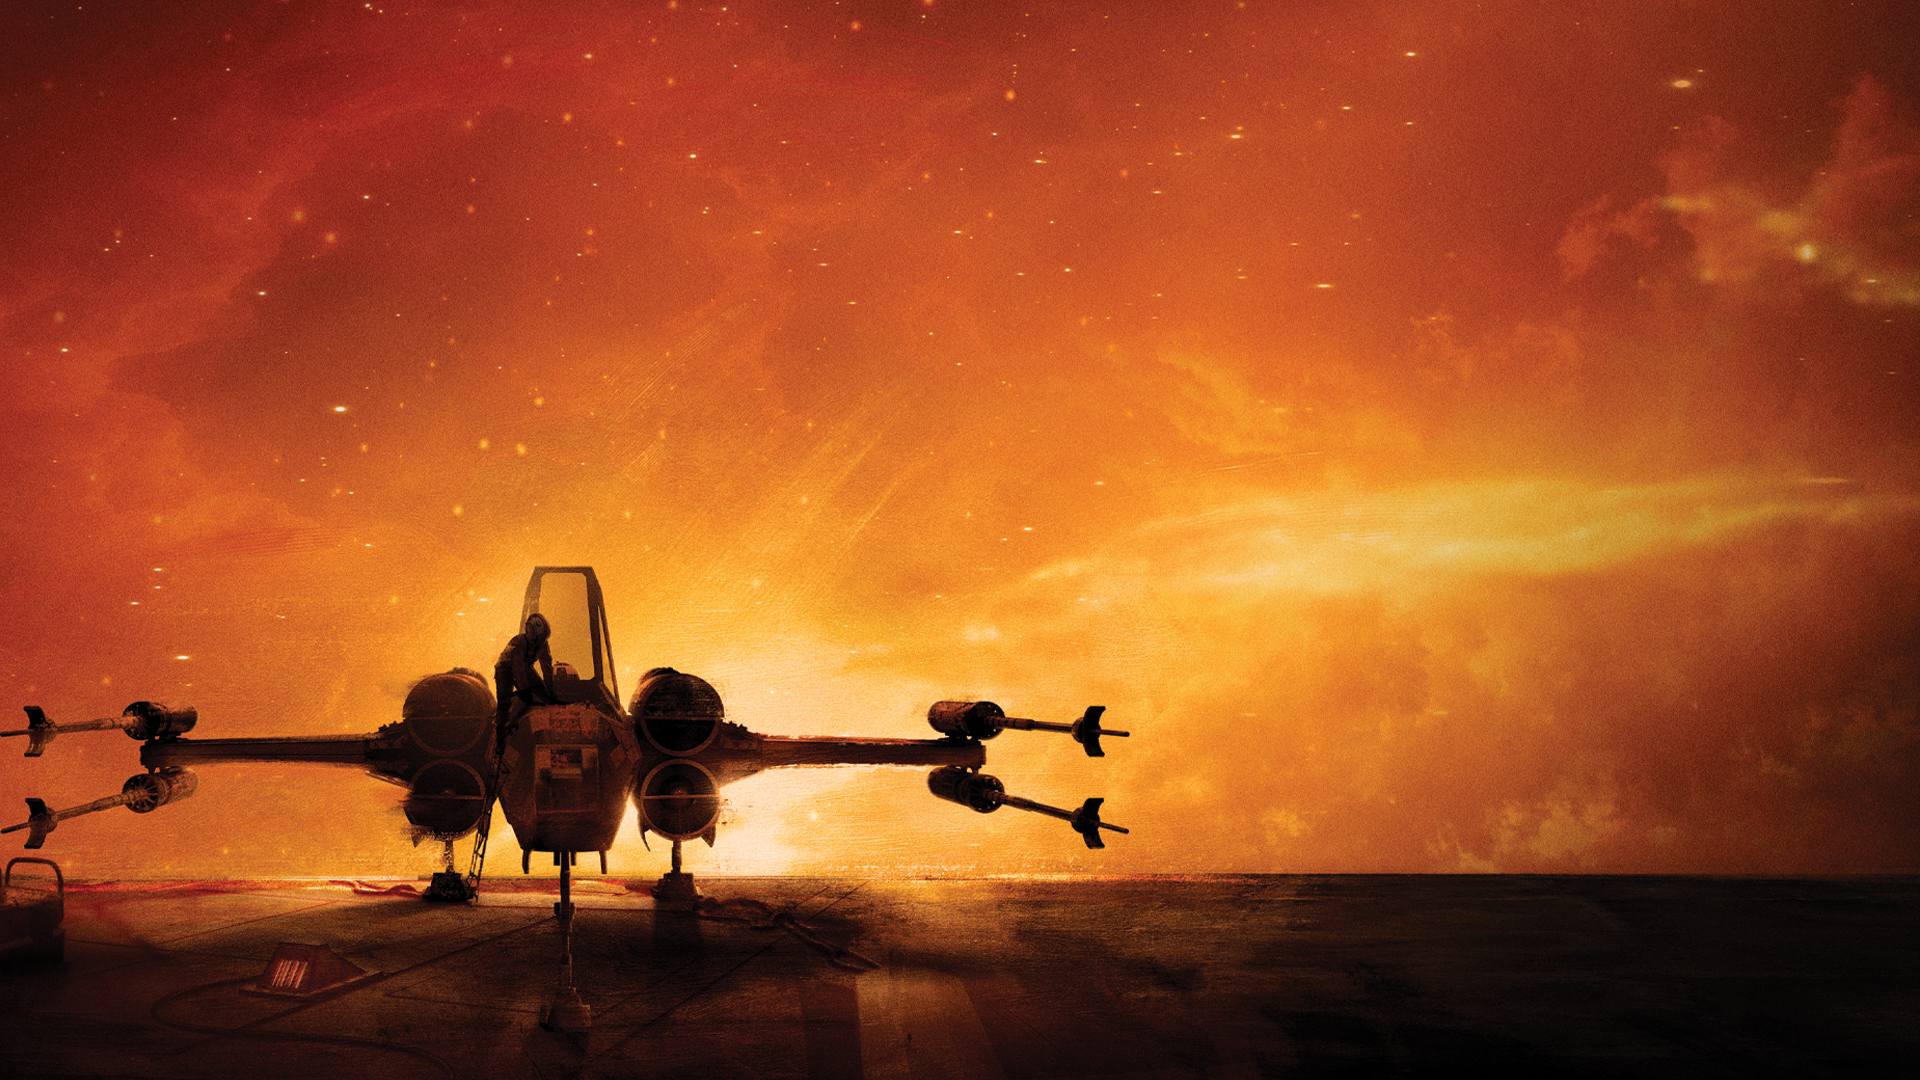 Squadrons Star Wars Wallpapers